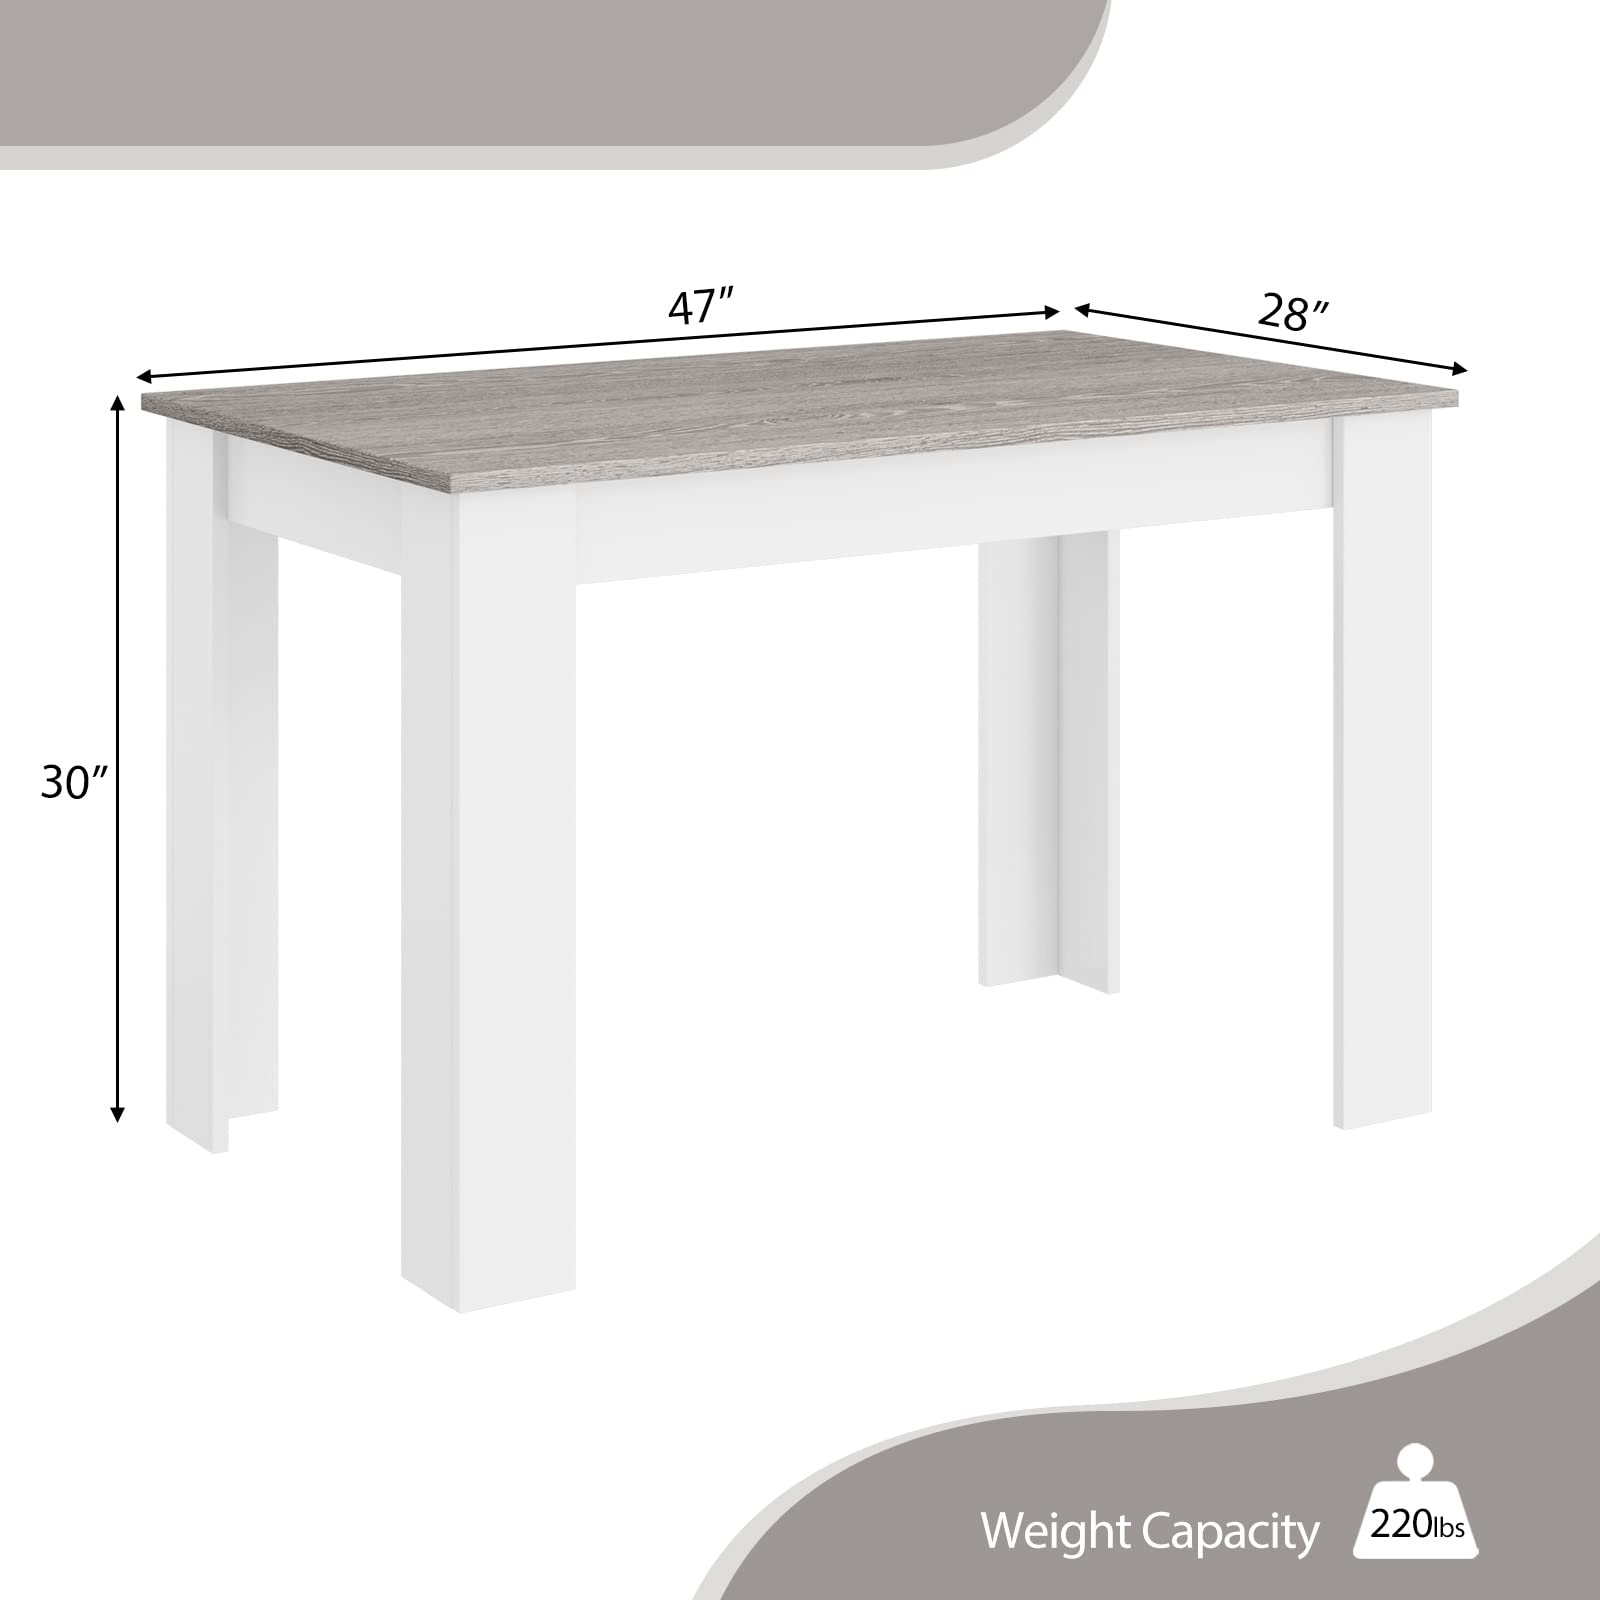 Giantex 47 Inch Dining Table, Kitchen Table for Small Spaces, Modern Rectangular Dinner Table